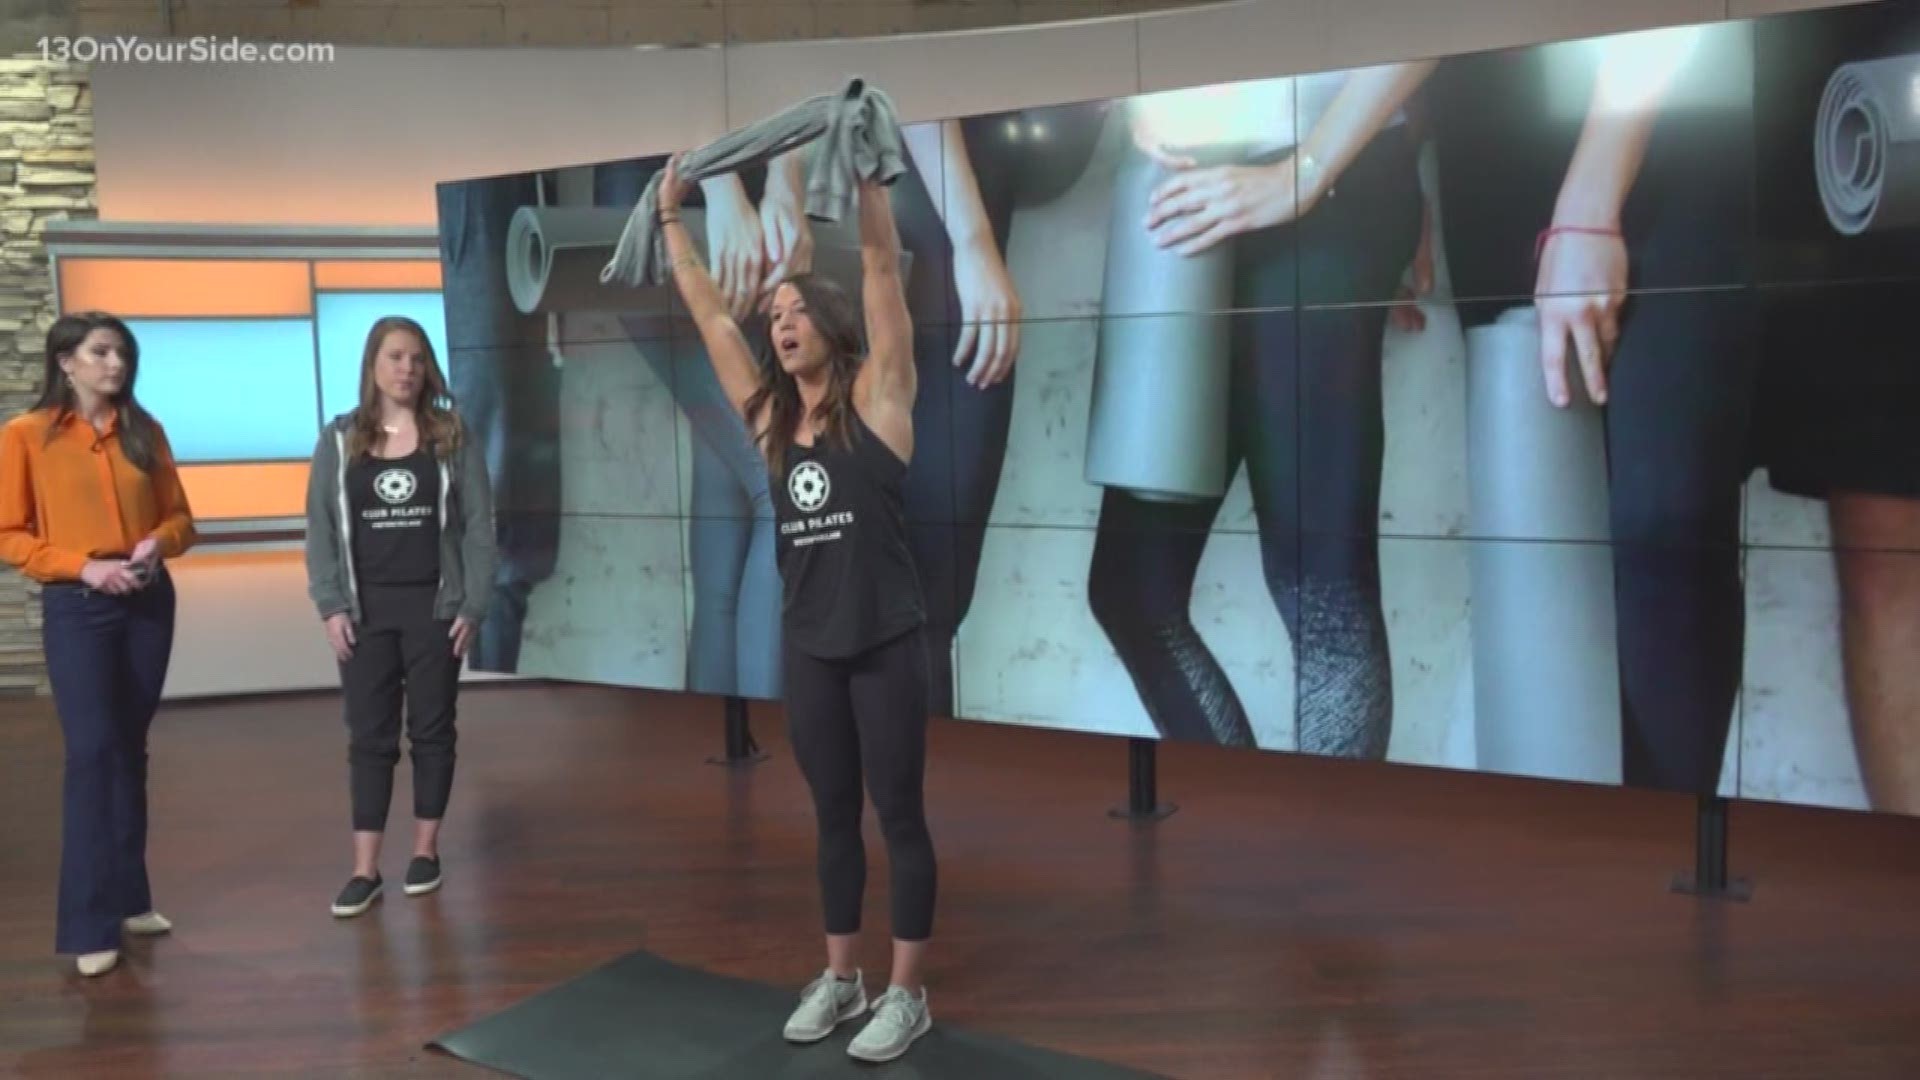 Pilates is a great way to get in shape, both mentally and physically. Representatives from Club Pilates came in to show us some easy at home moves you can try.